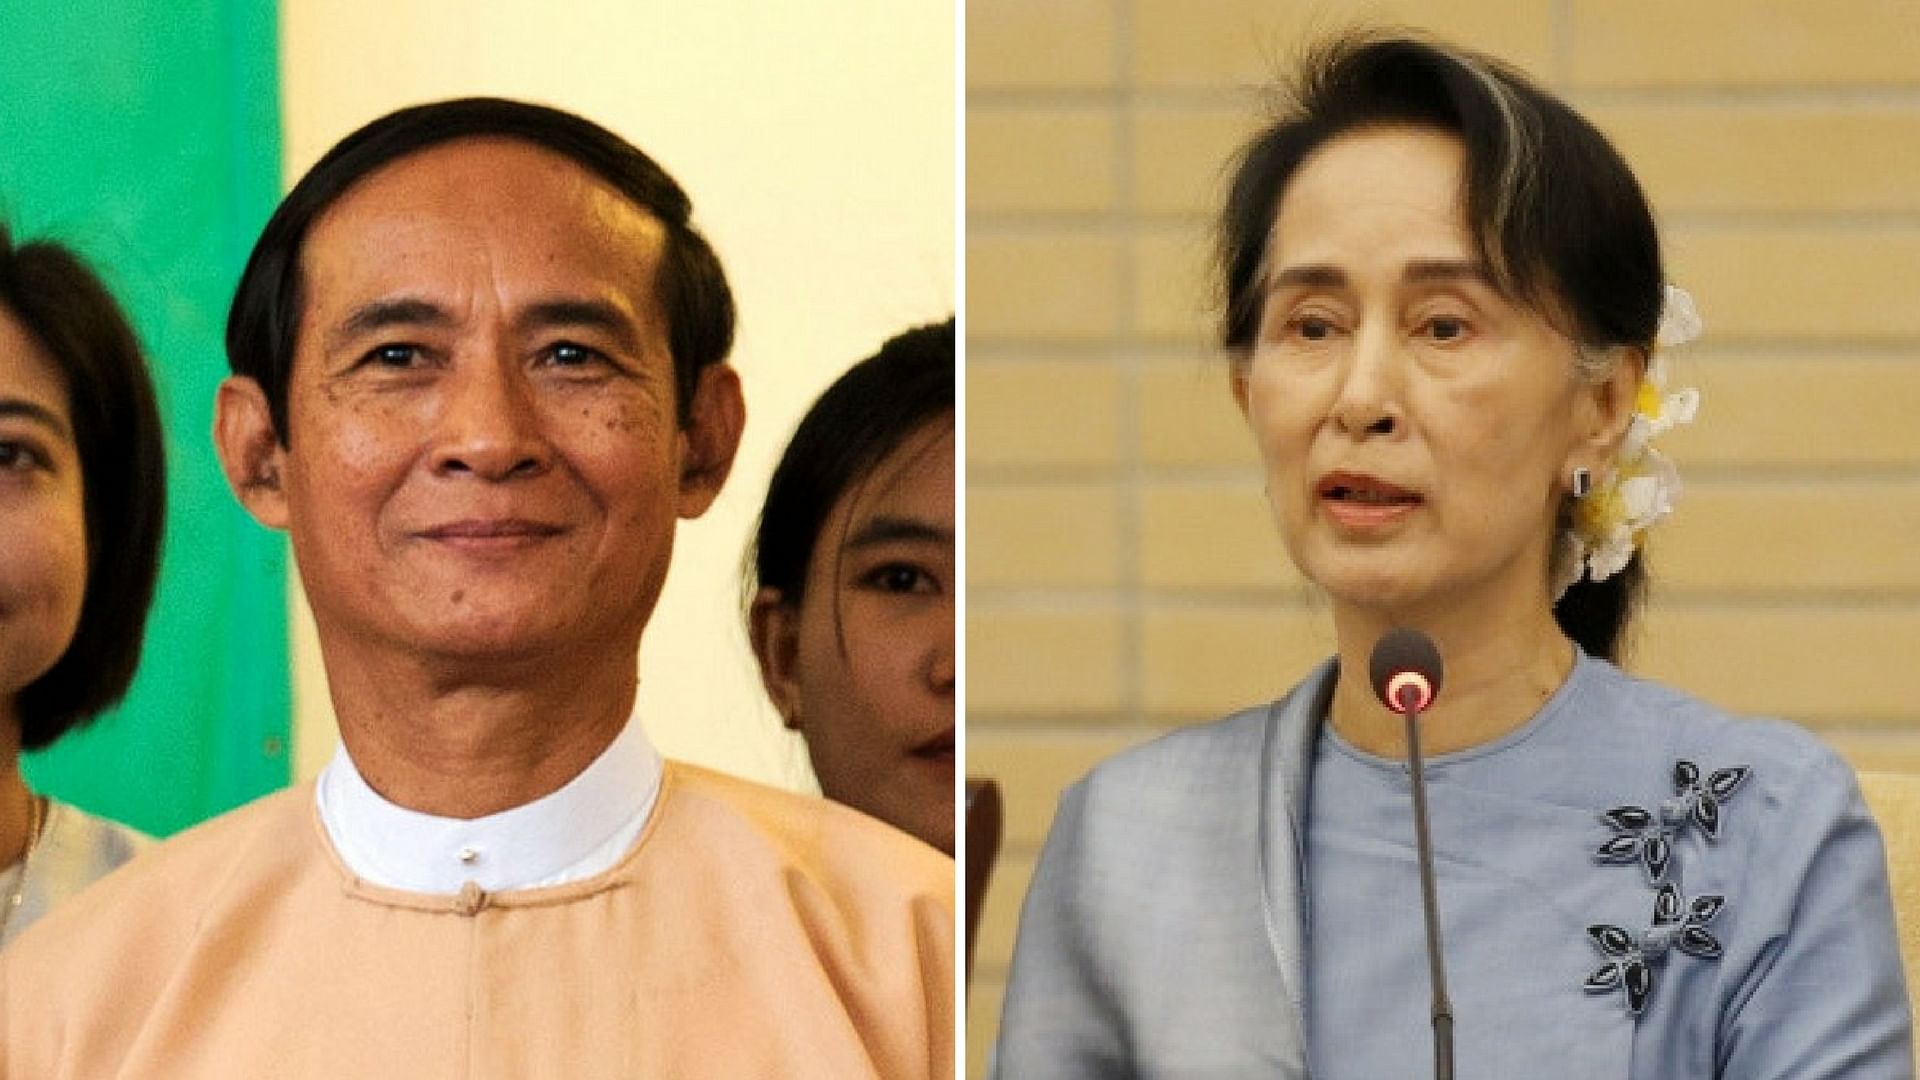 Win Myint has been described by his colleagues as a skilled political operator with loyalty to de facto leader Aung San Suu Kyi.